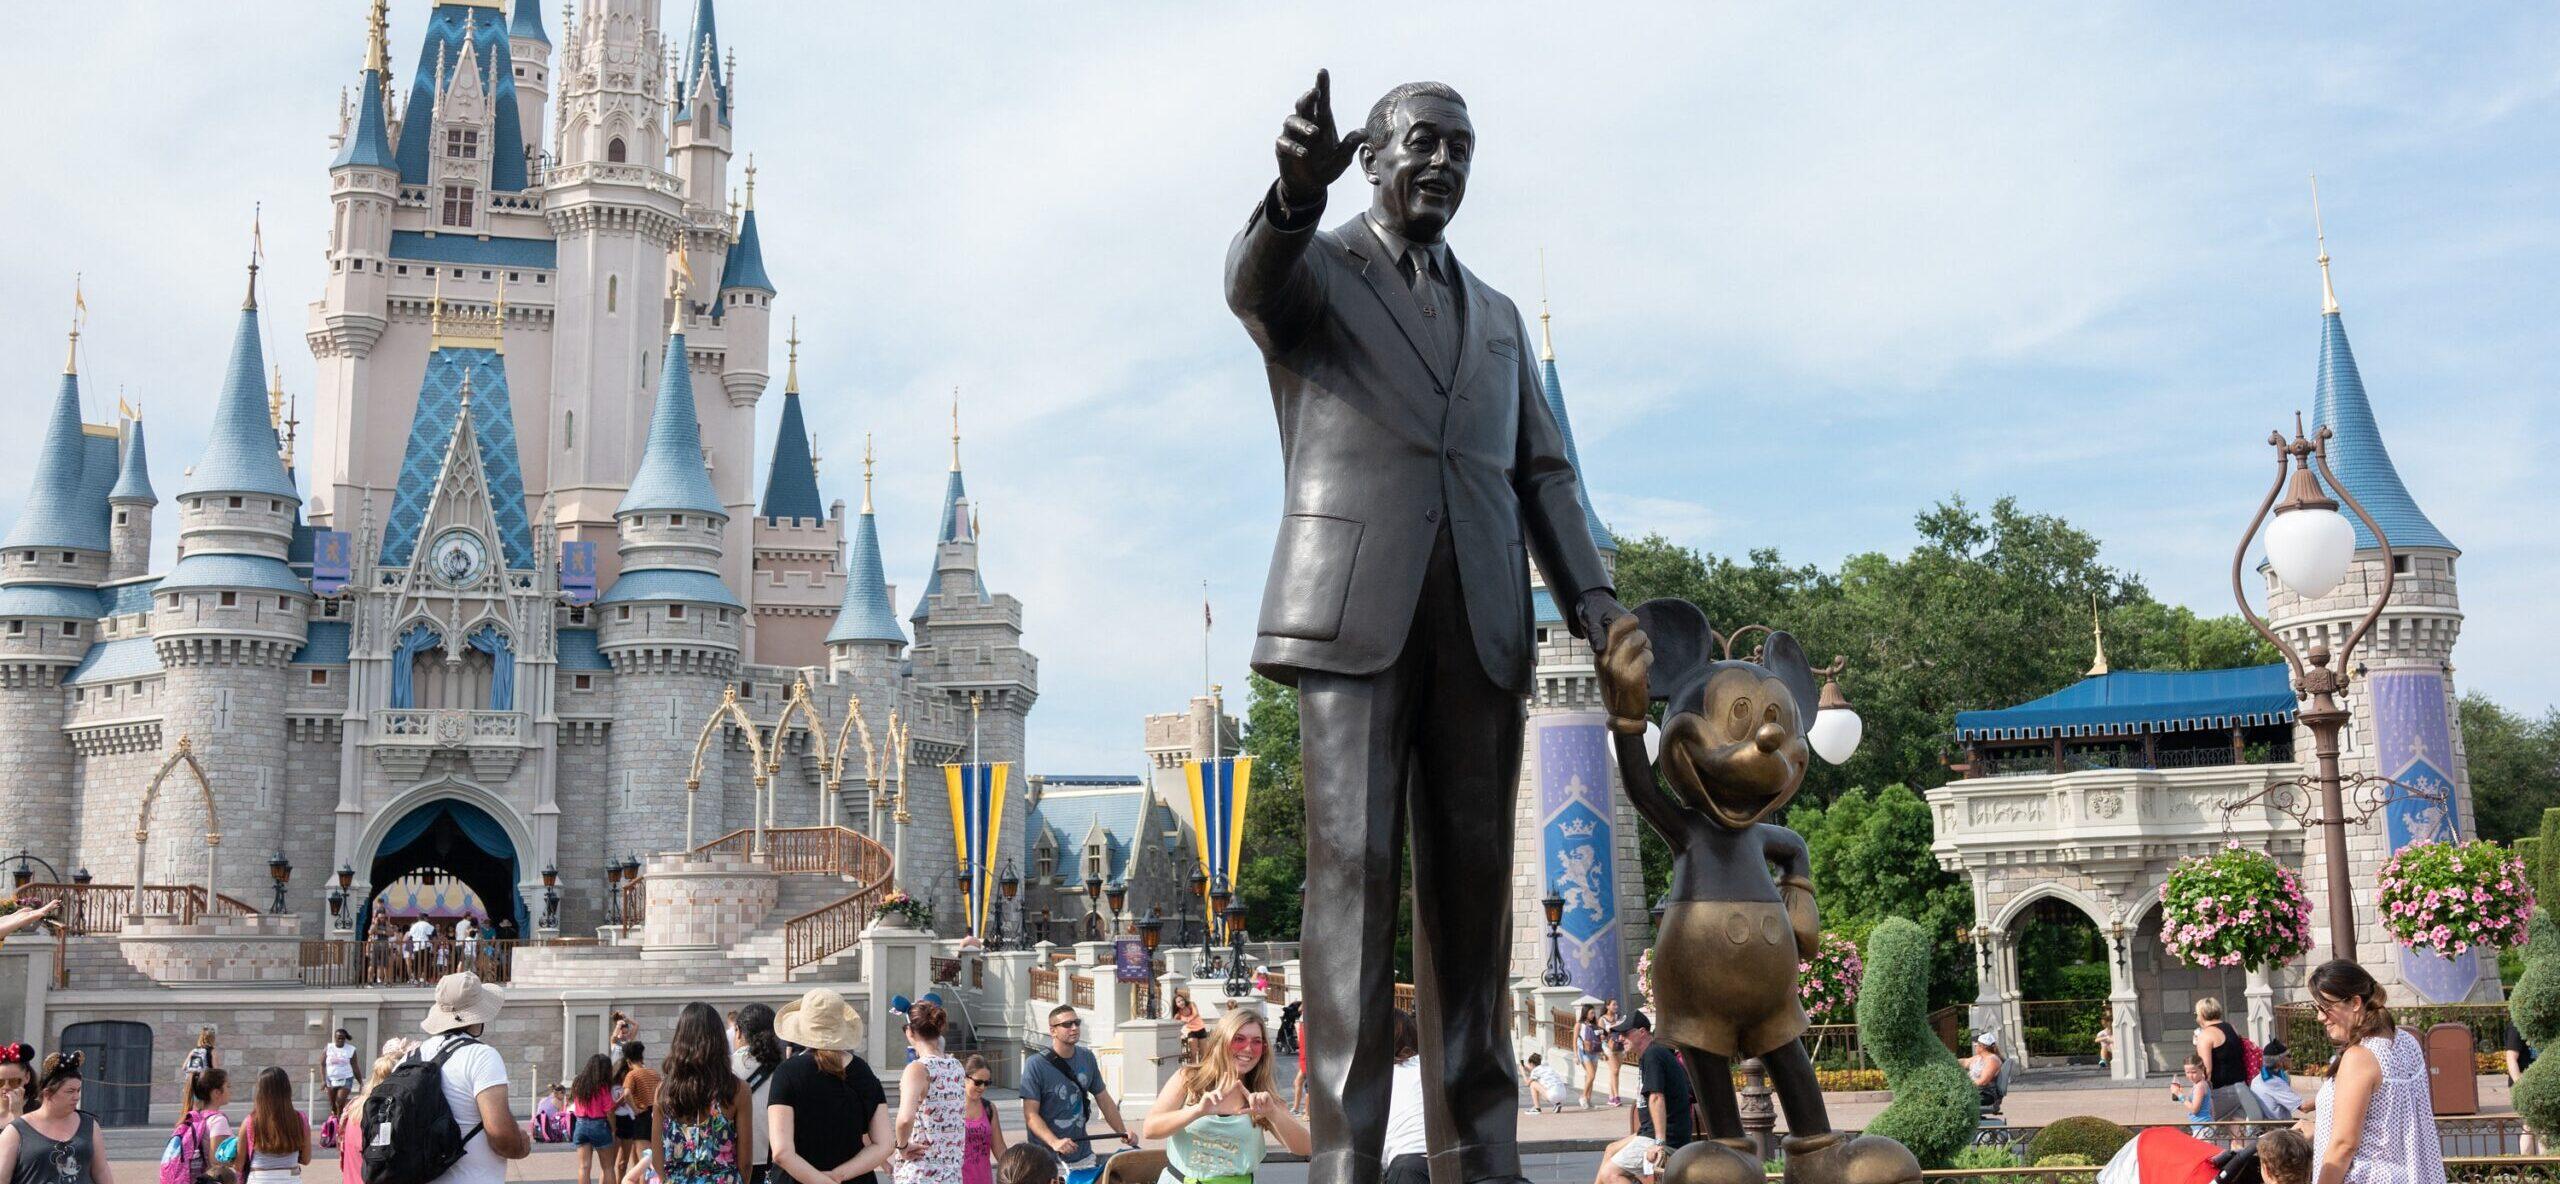 Drunk Disney World Guest Busted For Assaulting Police, Throwing Furniture